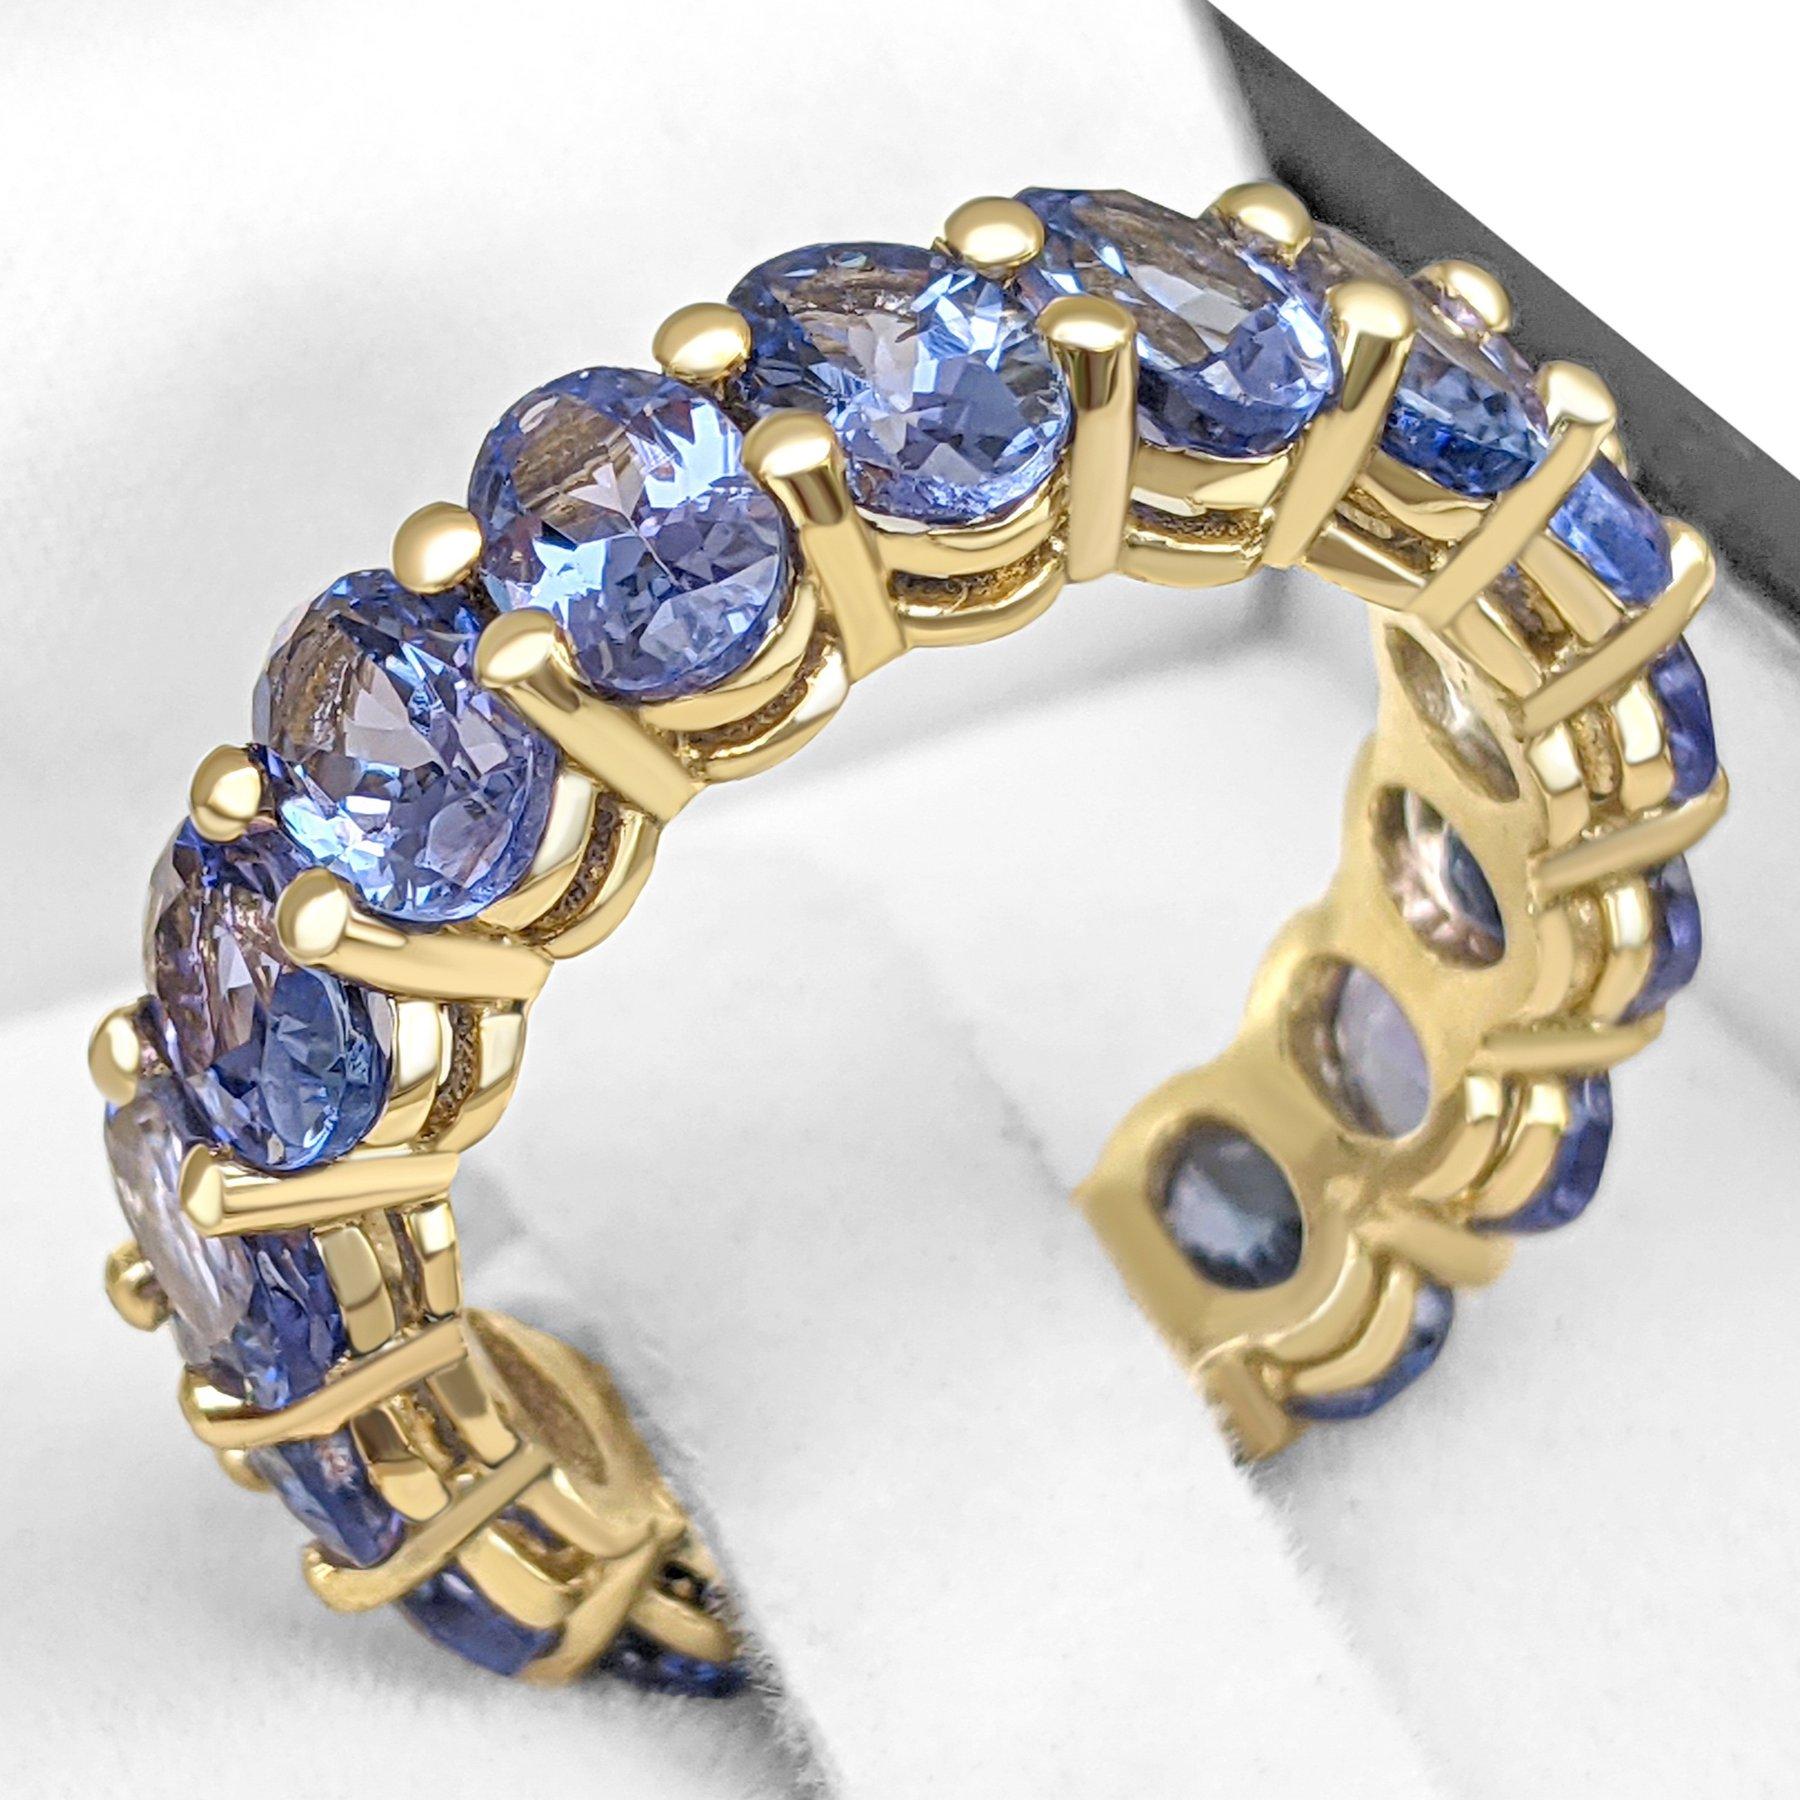 Oval Cut NO RESERVE! 7.31 Carat Tanzanite Eternity Band - 14 kt. Yellow Gold - Ring For Sale